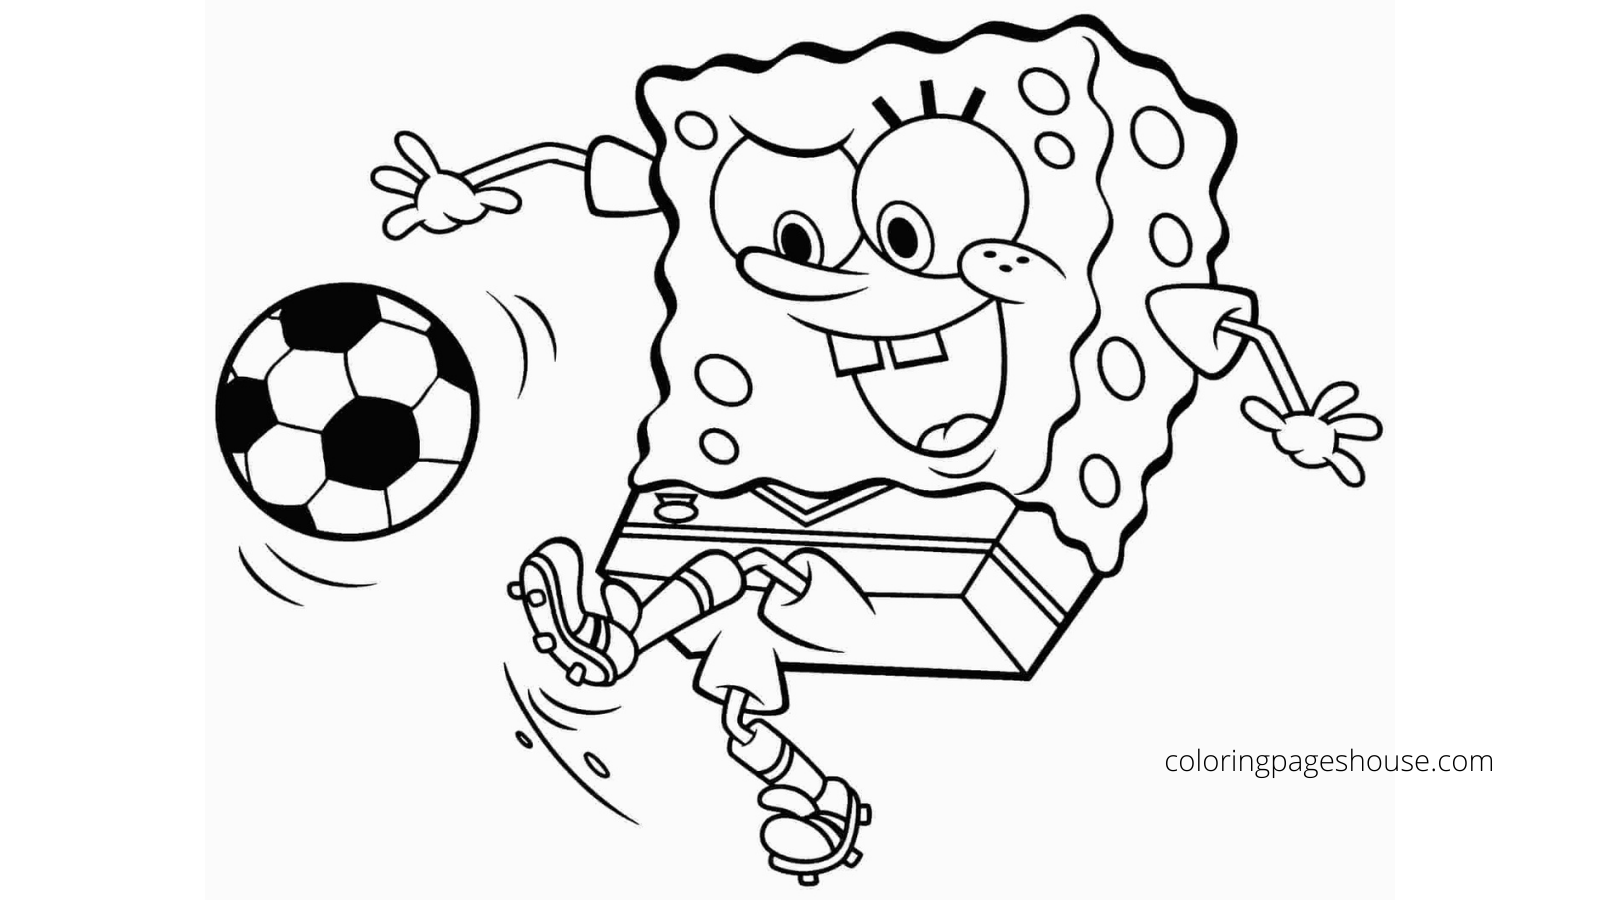 Techno gamer on x spongebob squarepants coloring pages click here for more free printable coloring pages httpstcoraguvlyxt coloring coloringbook coloringpages printable mickey coloringpageshouse httpstcomregfyjqq x